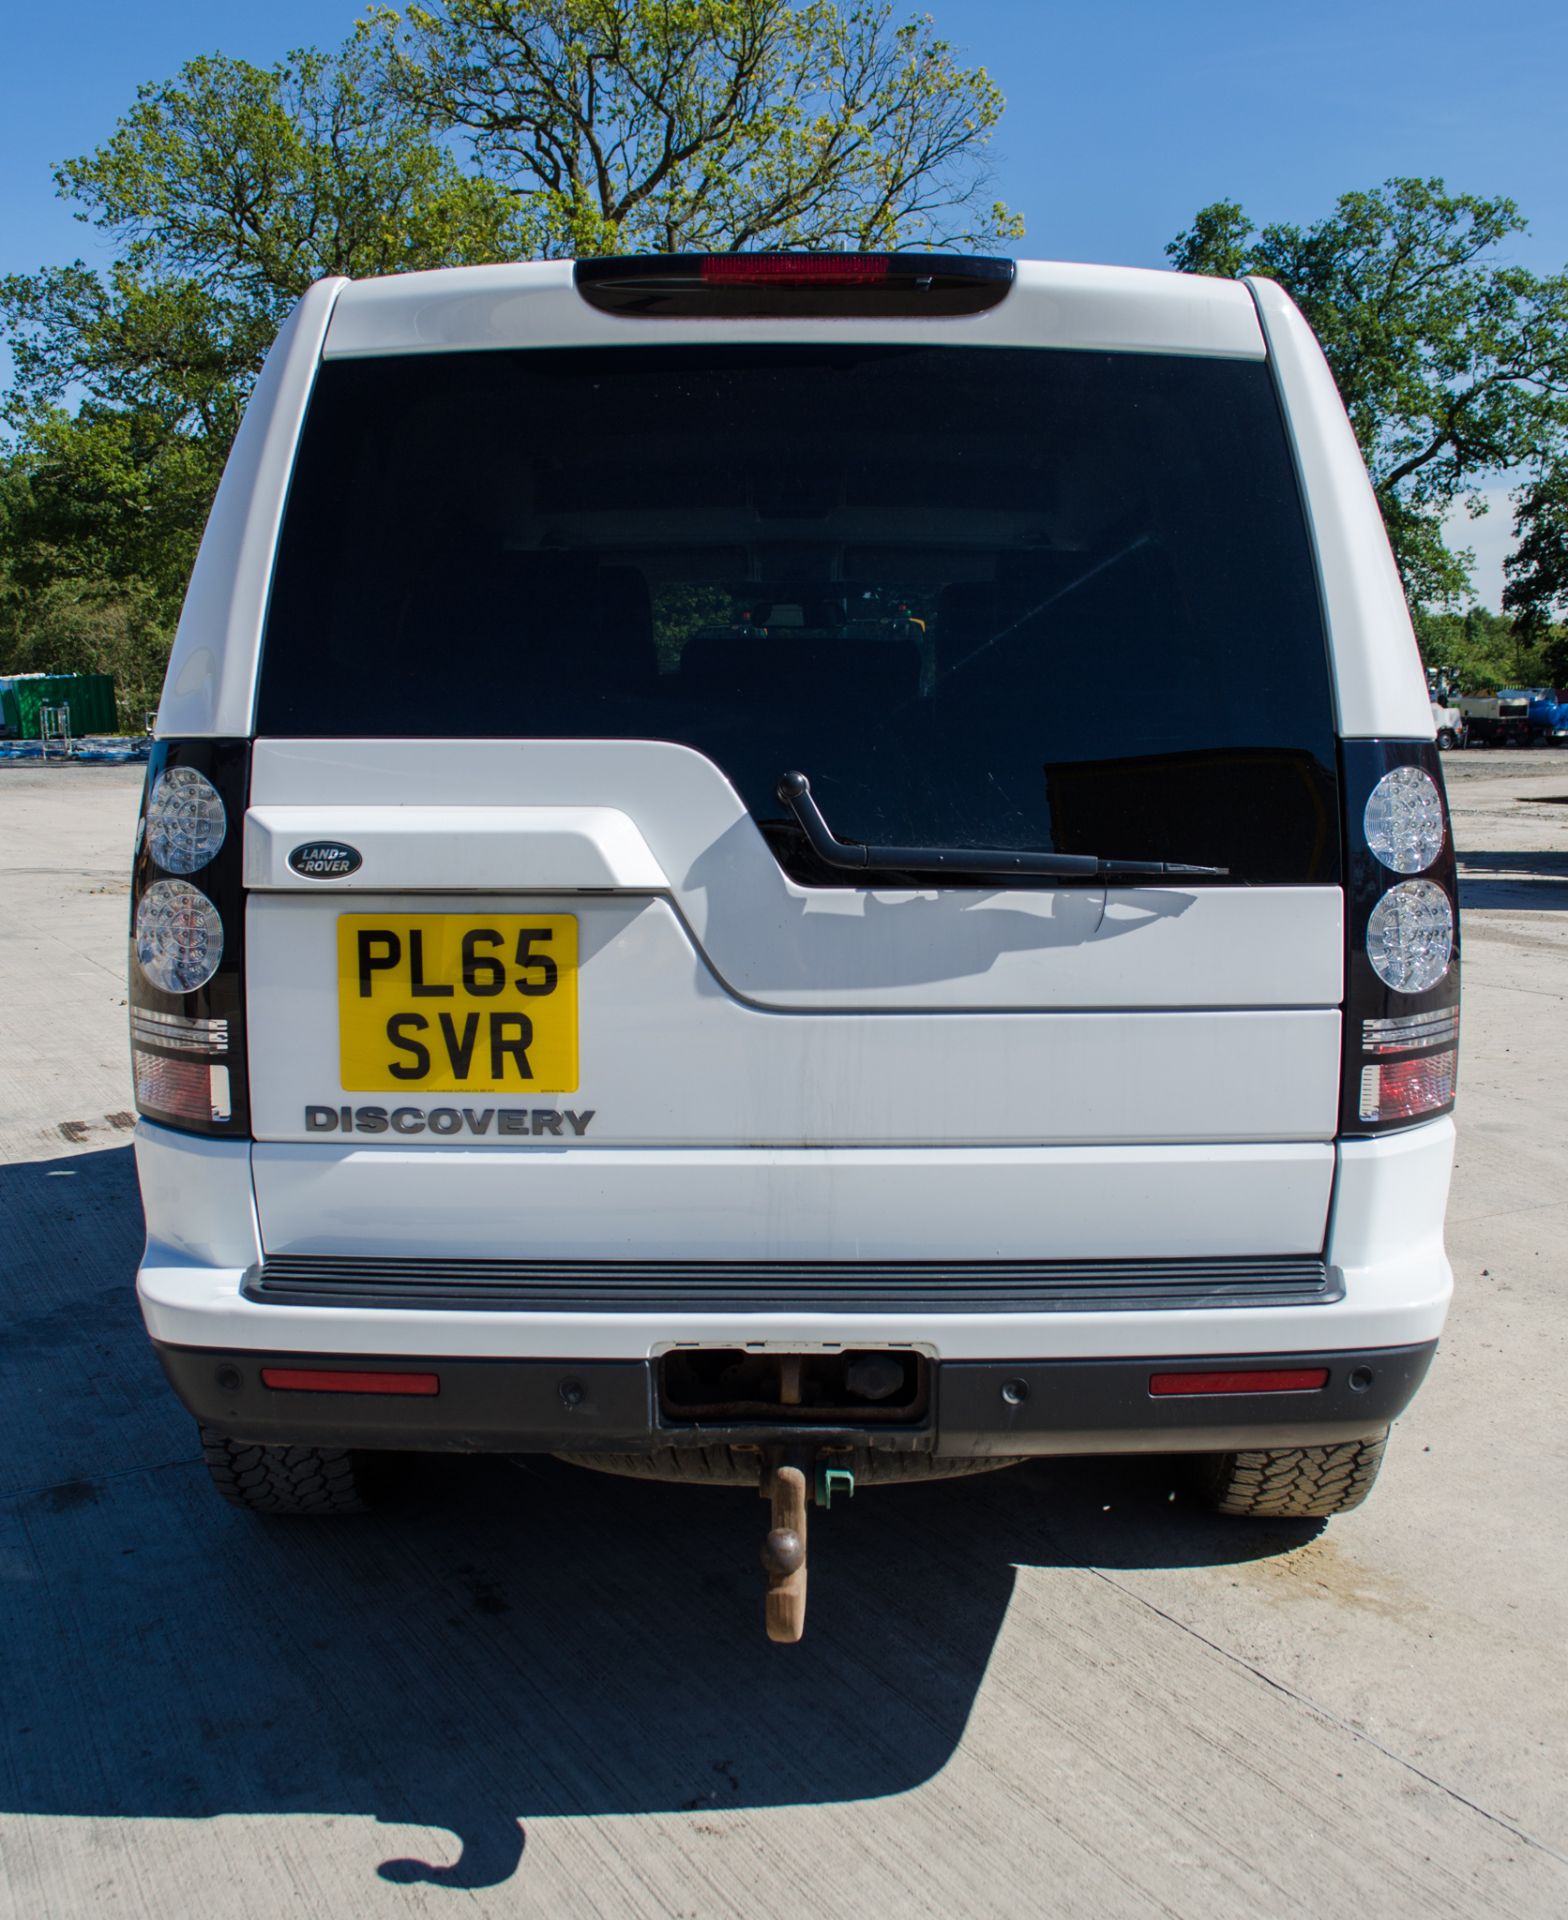 Land Rover Discovery 4 3.0 SE SDV6 Commercial 4x4 utility vehicle Reg No: PL65 SVR Date of - Image 6 of 32